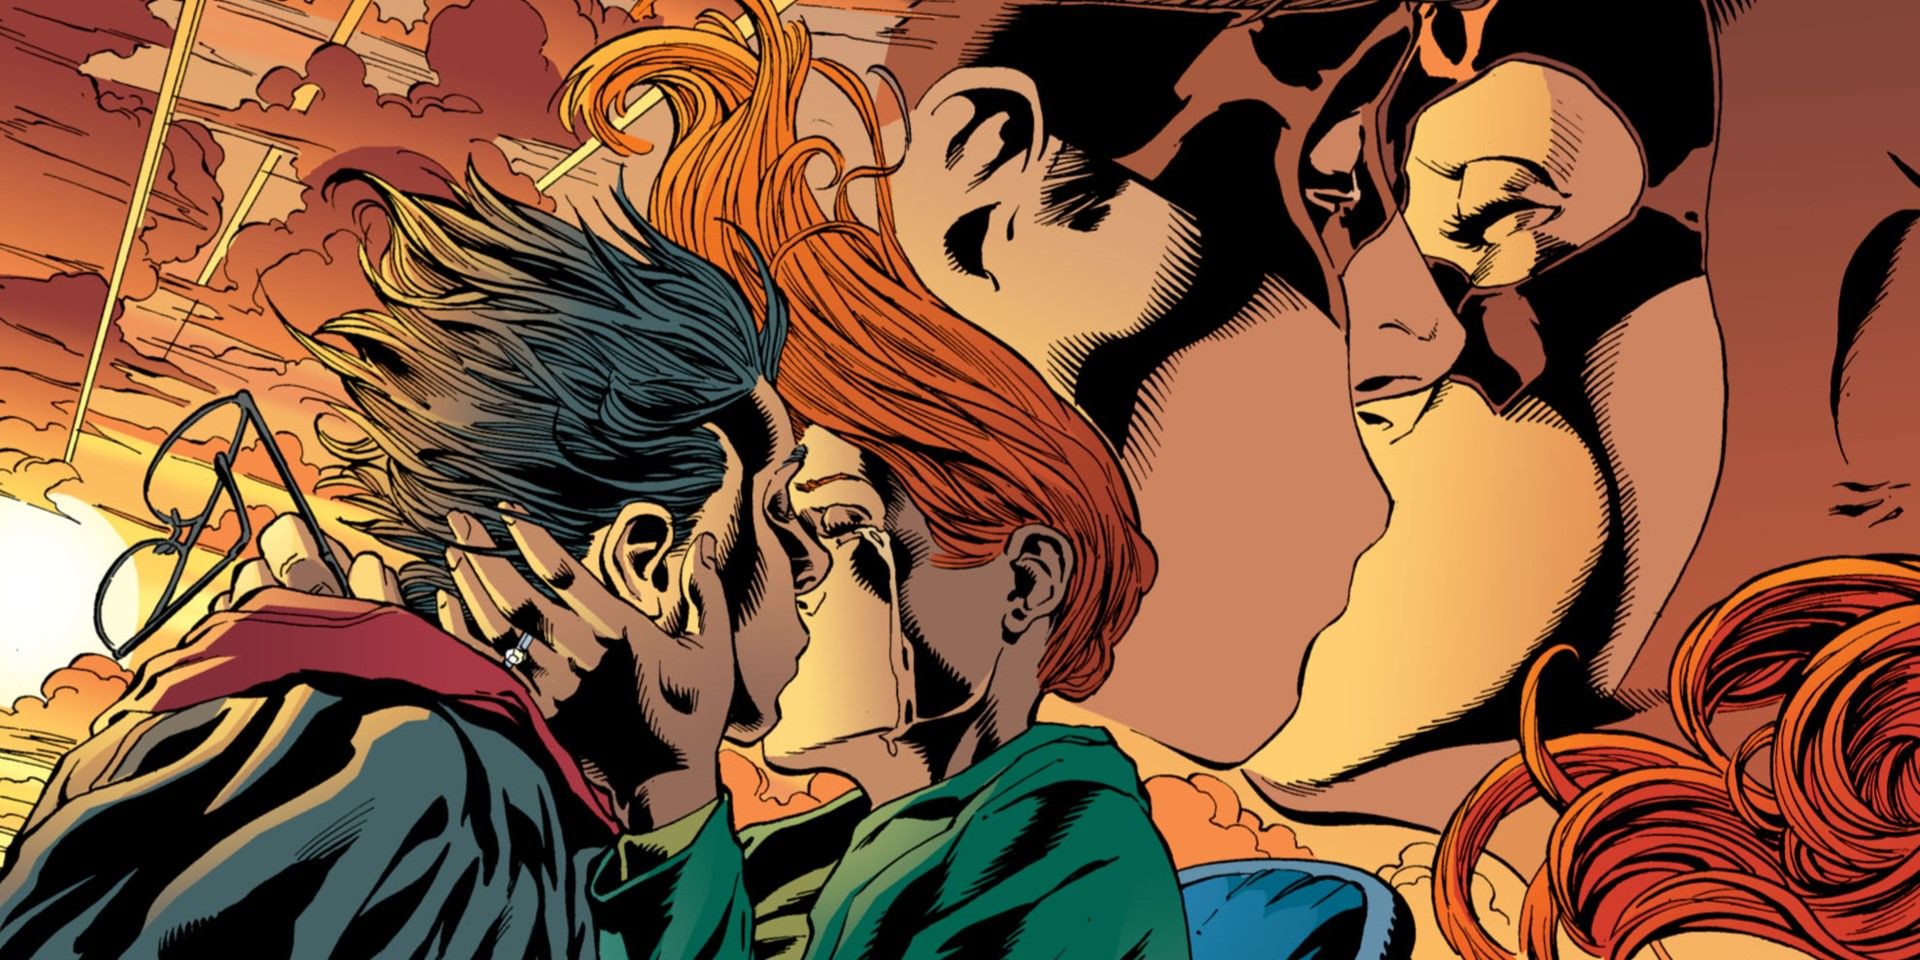 Dick Grayson and Barbara Gordon get engaged in DC Comics